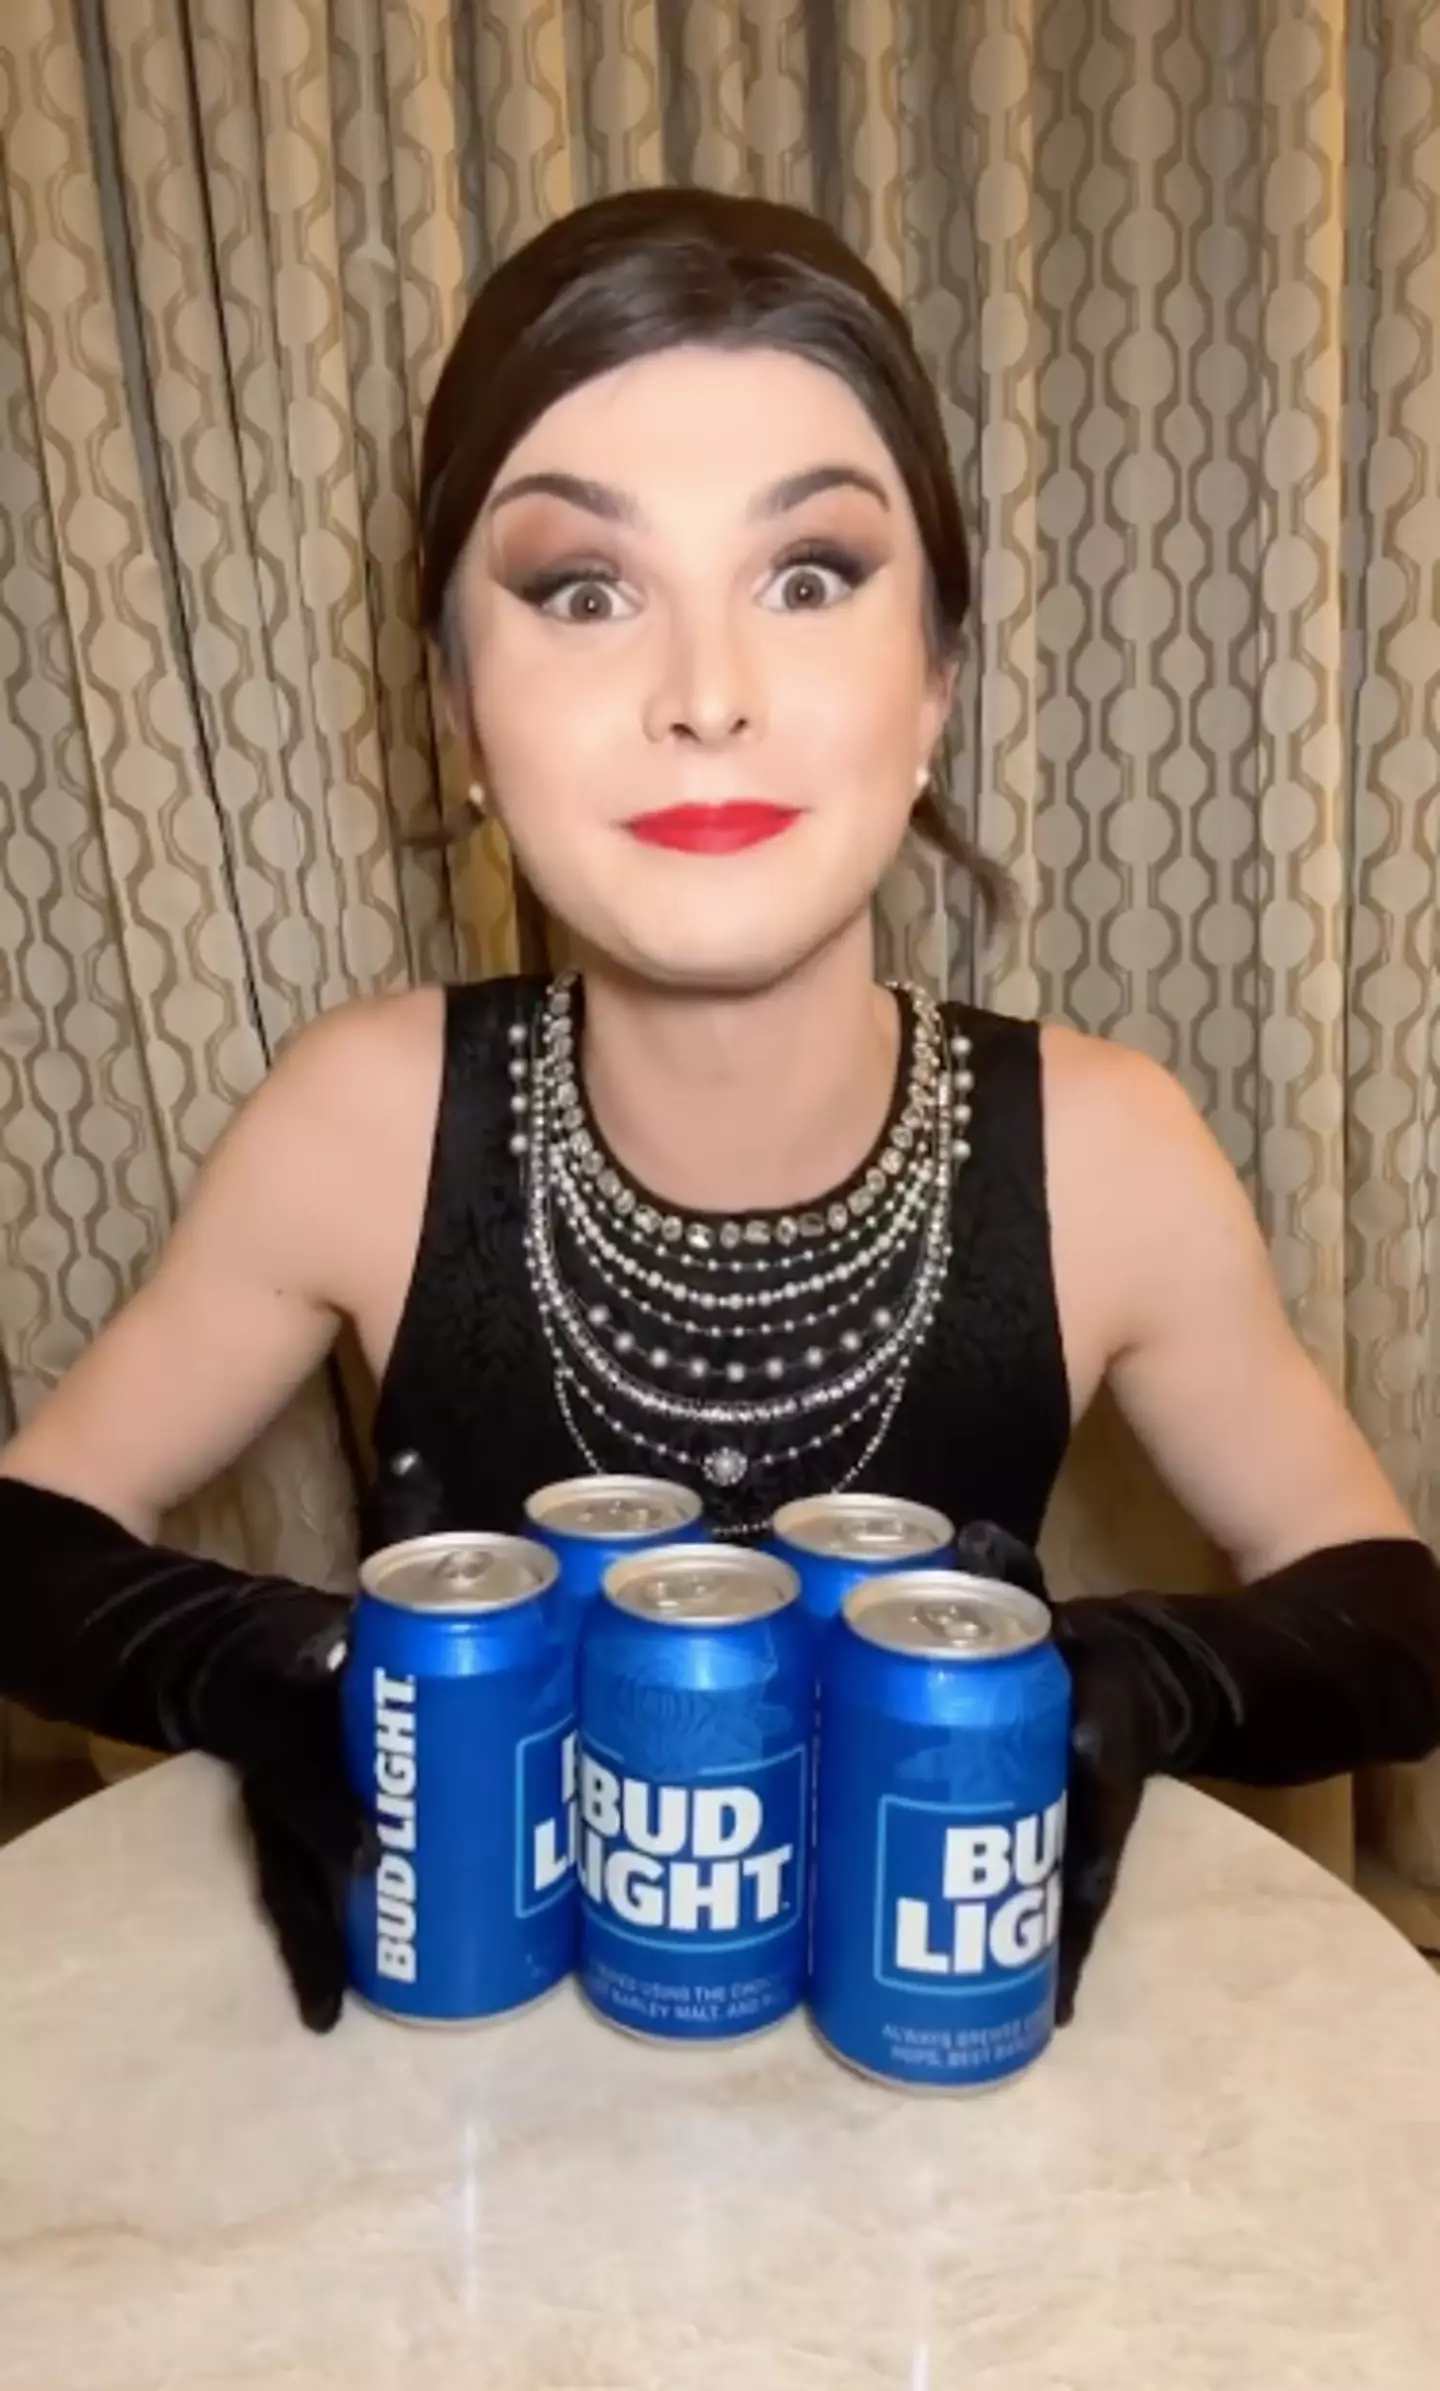 Dylan Mulvaney shows her fans the cans of beer she received from Bud Light.